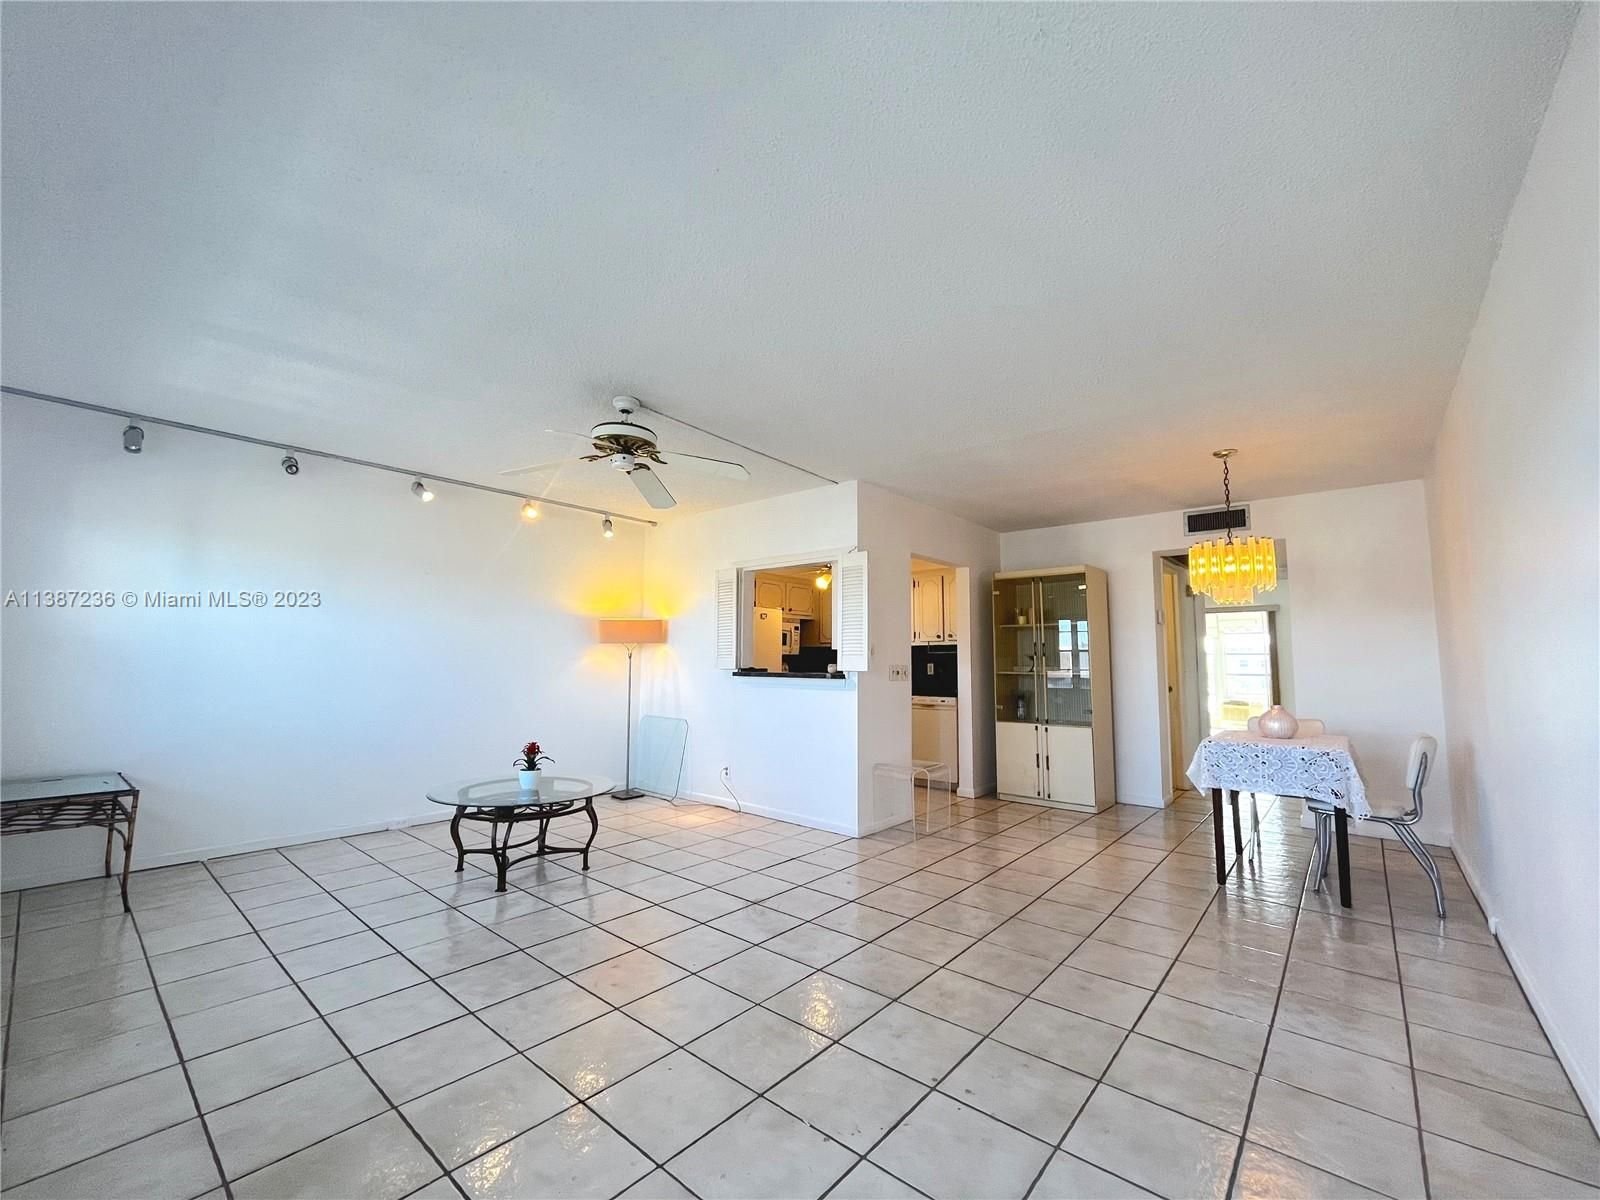 Real estate property located at 4123 Cambridge F #4123, Broward County, Deerfield Beach, FL